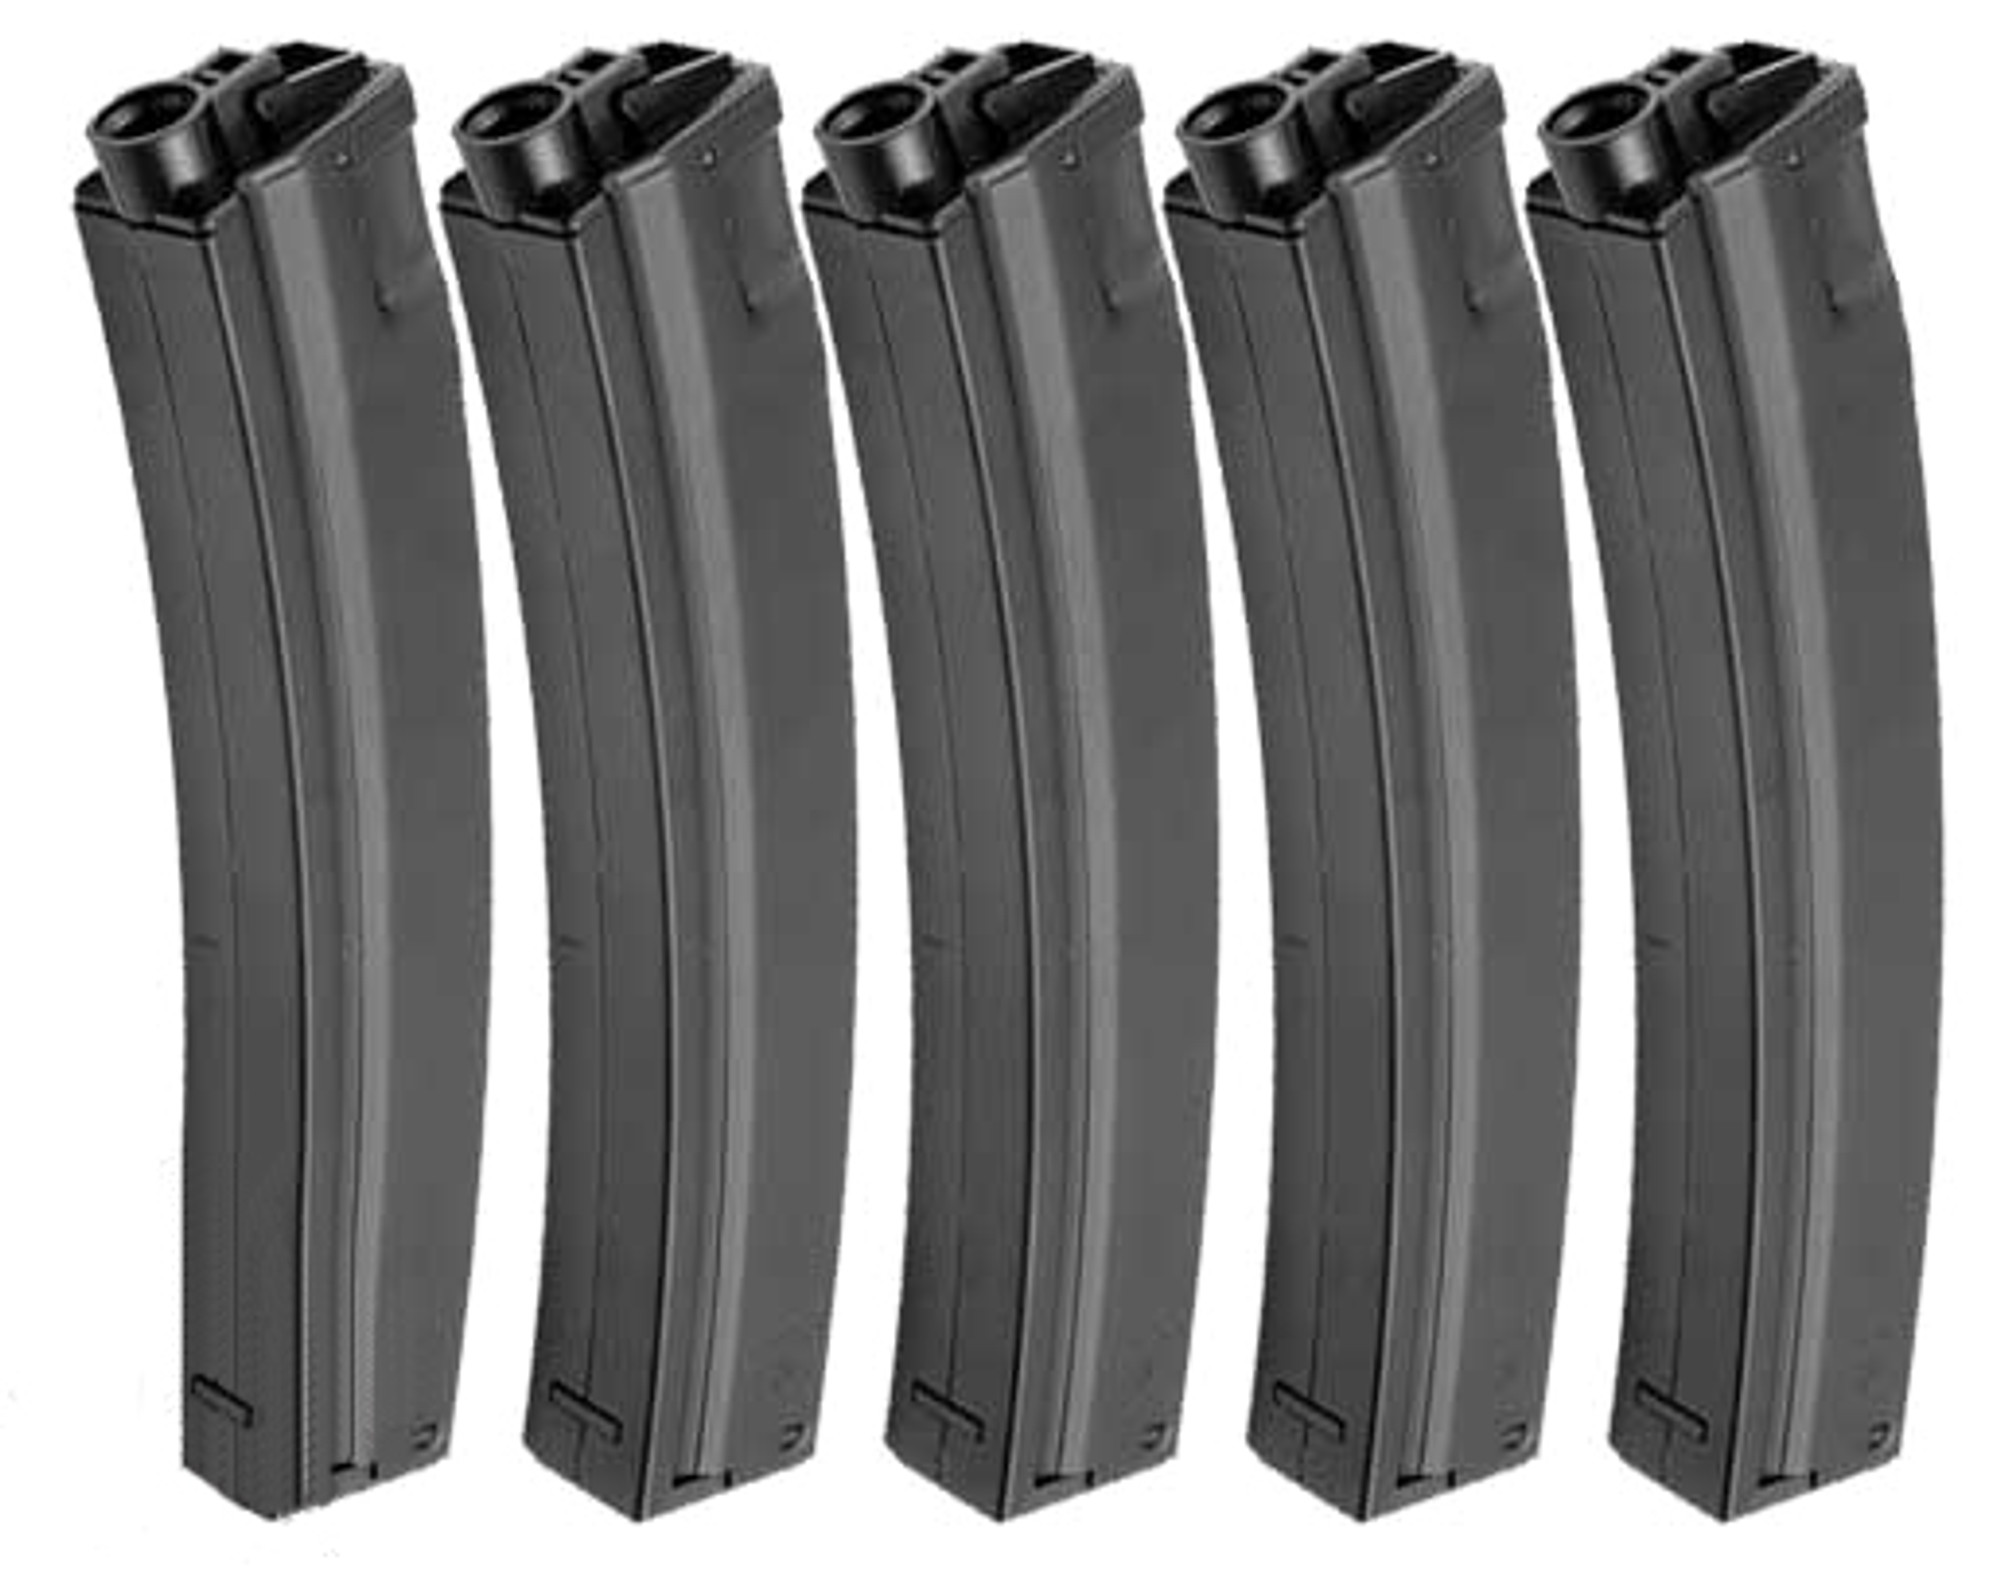 Matrix 260 Round Hicap Full Metal Magazine for MP5 / MOD5 Series Airsoft AEG (Package: Set of 5)